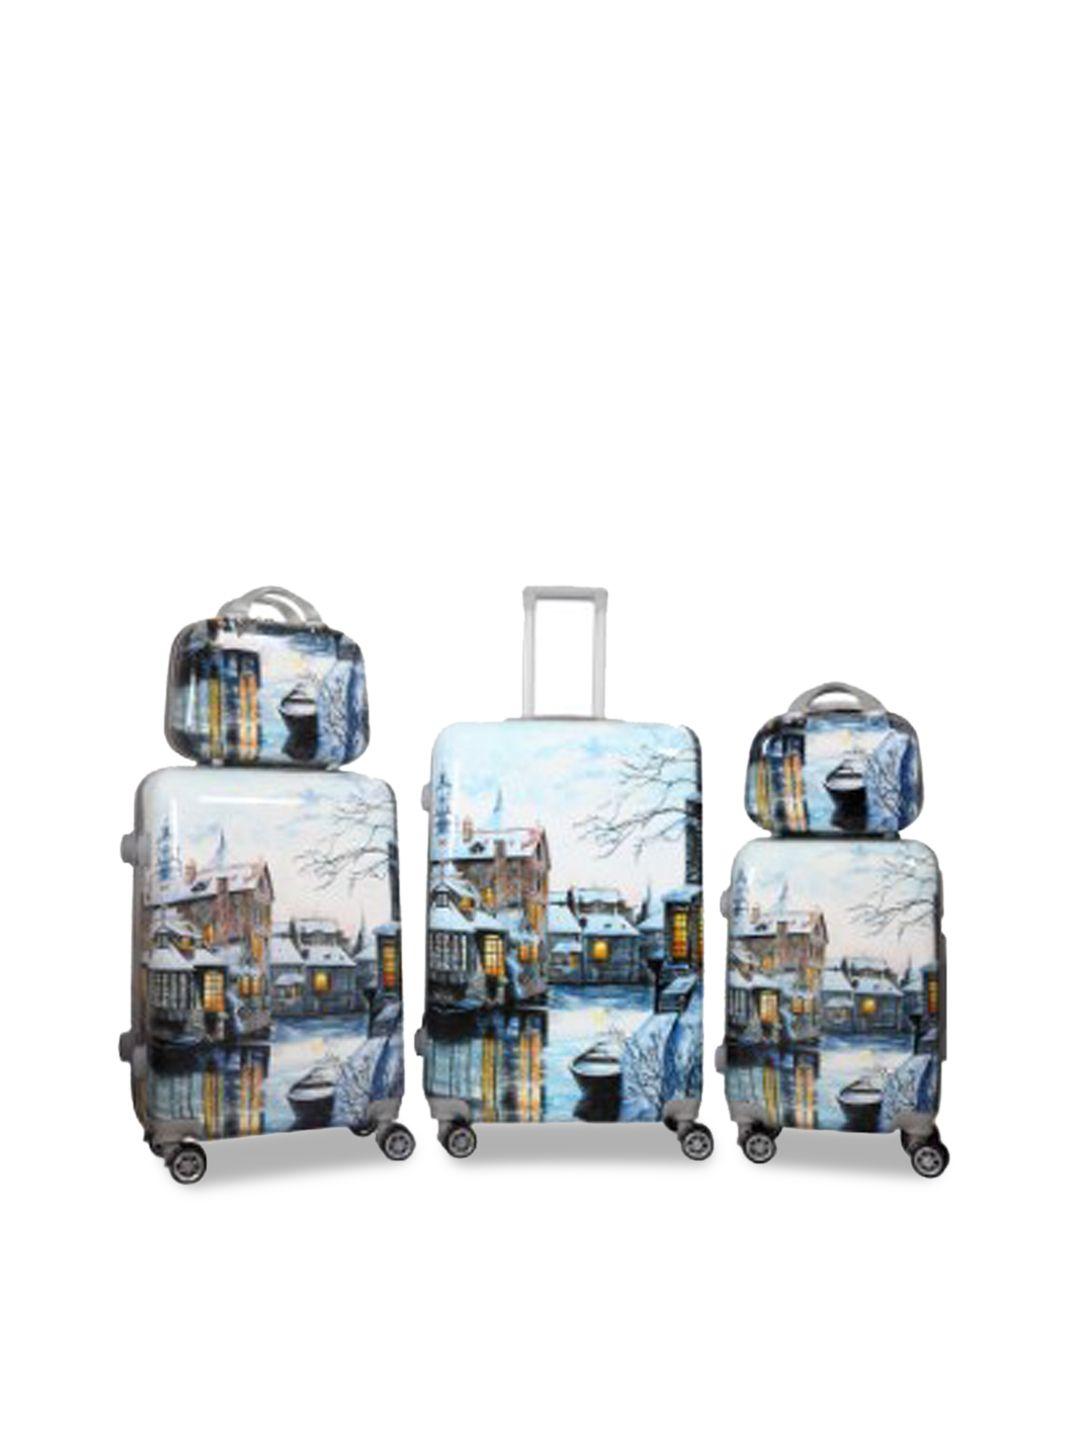 polo class set of 3 white & grey printed hard-sided trolley suitcases with 2 vanity bags